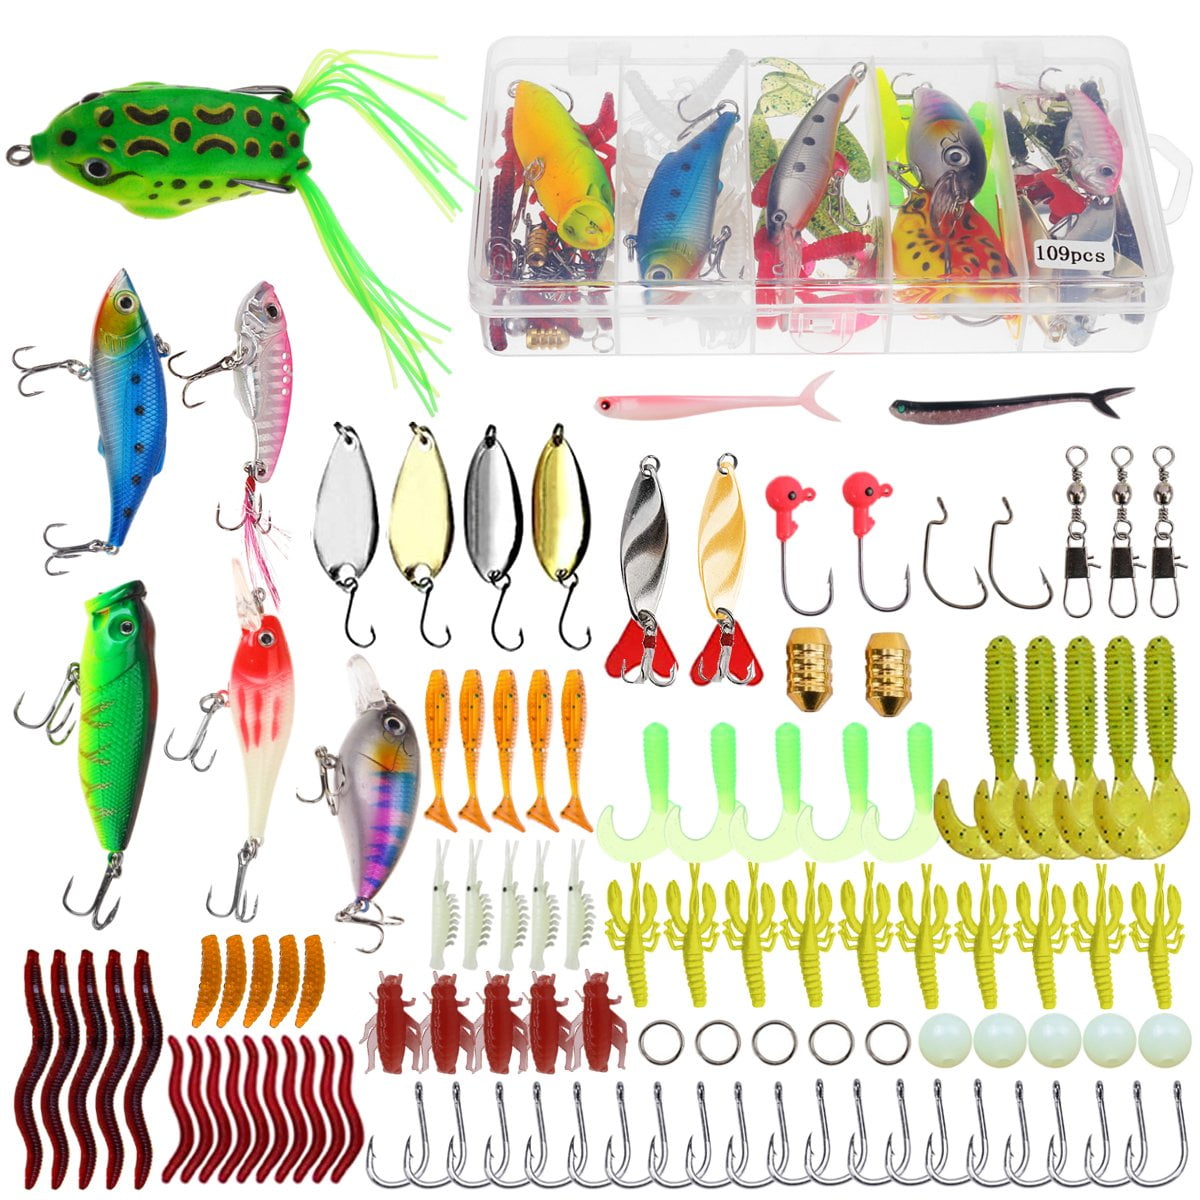 Magreel Fishing Tackle Kit 229pcs Texas and Carolina Rig Kit Including Fishing Offset Hooks Beads Sinkers Swivels Swimbaits for Bass Trout Salmon Perch 